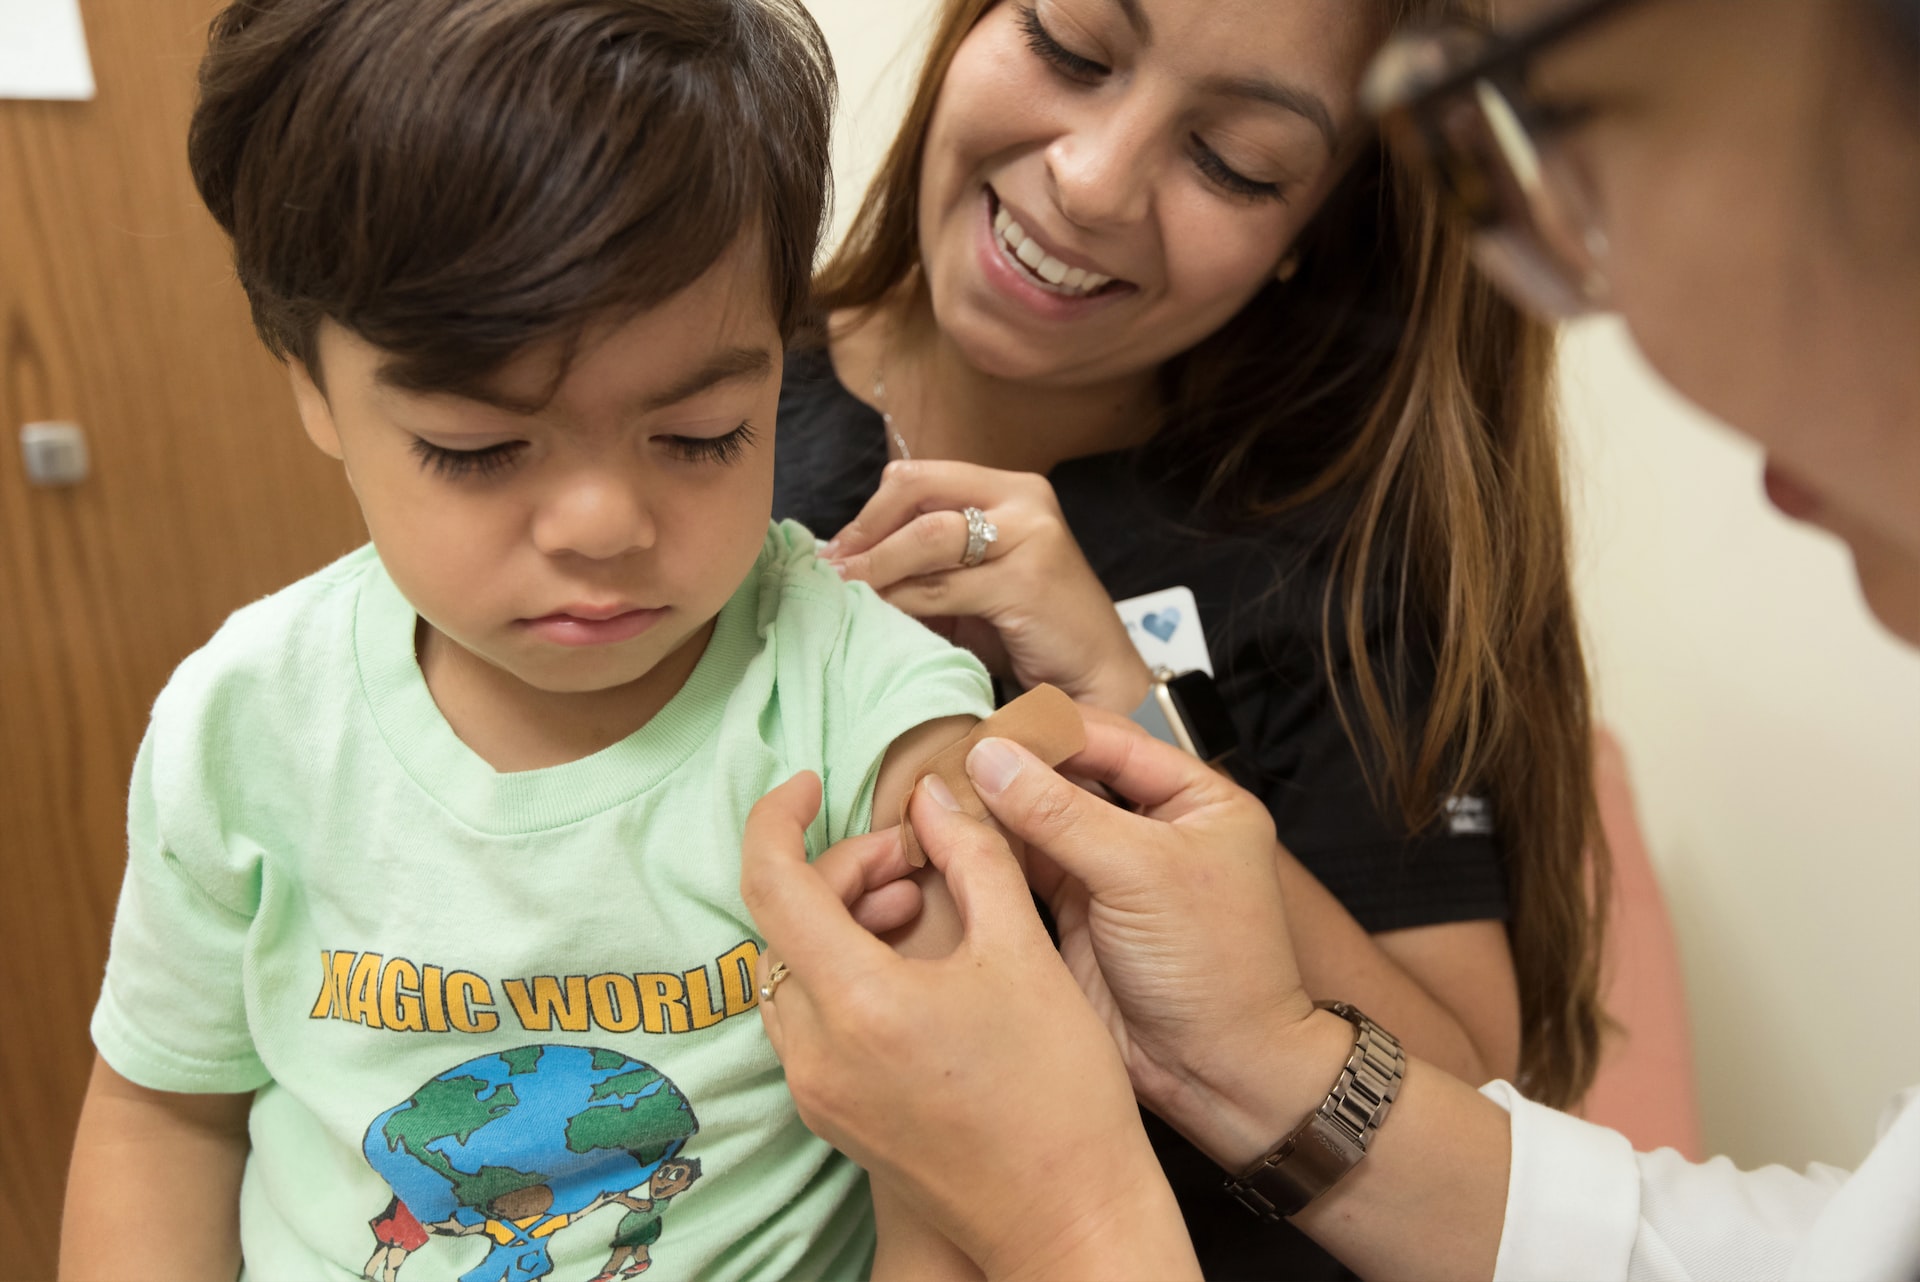 Health officials urge parents to get their children vaccinated ahead of school year